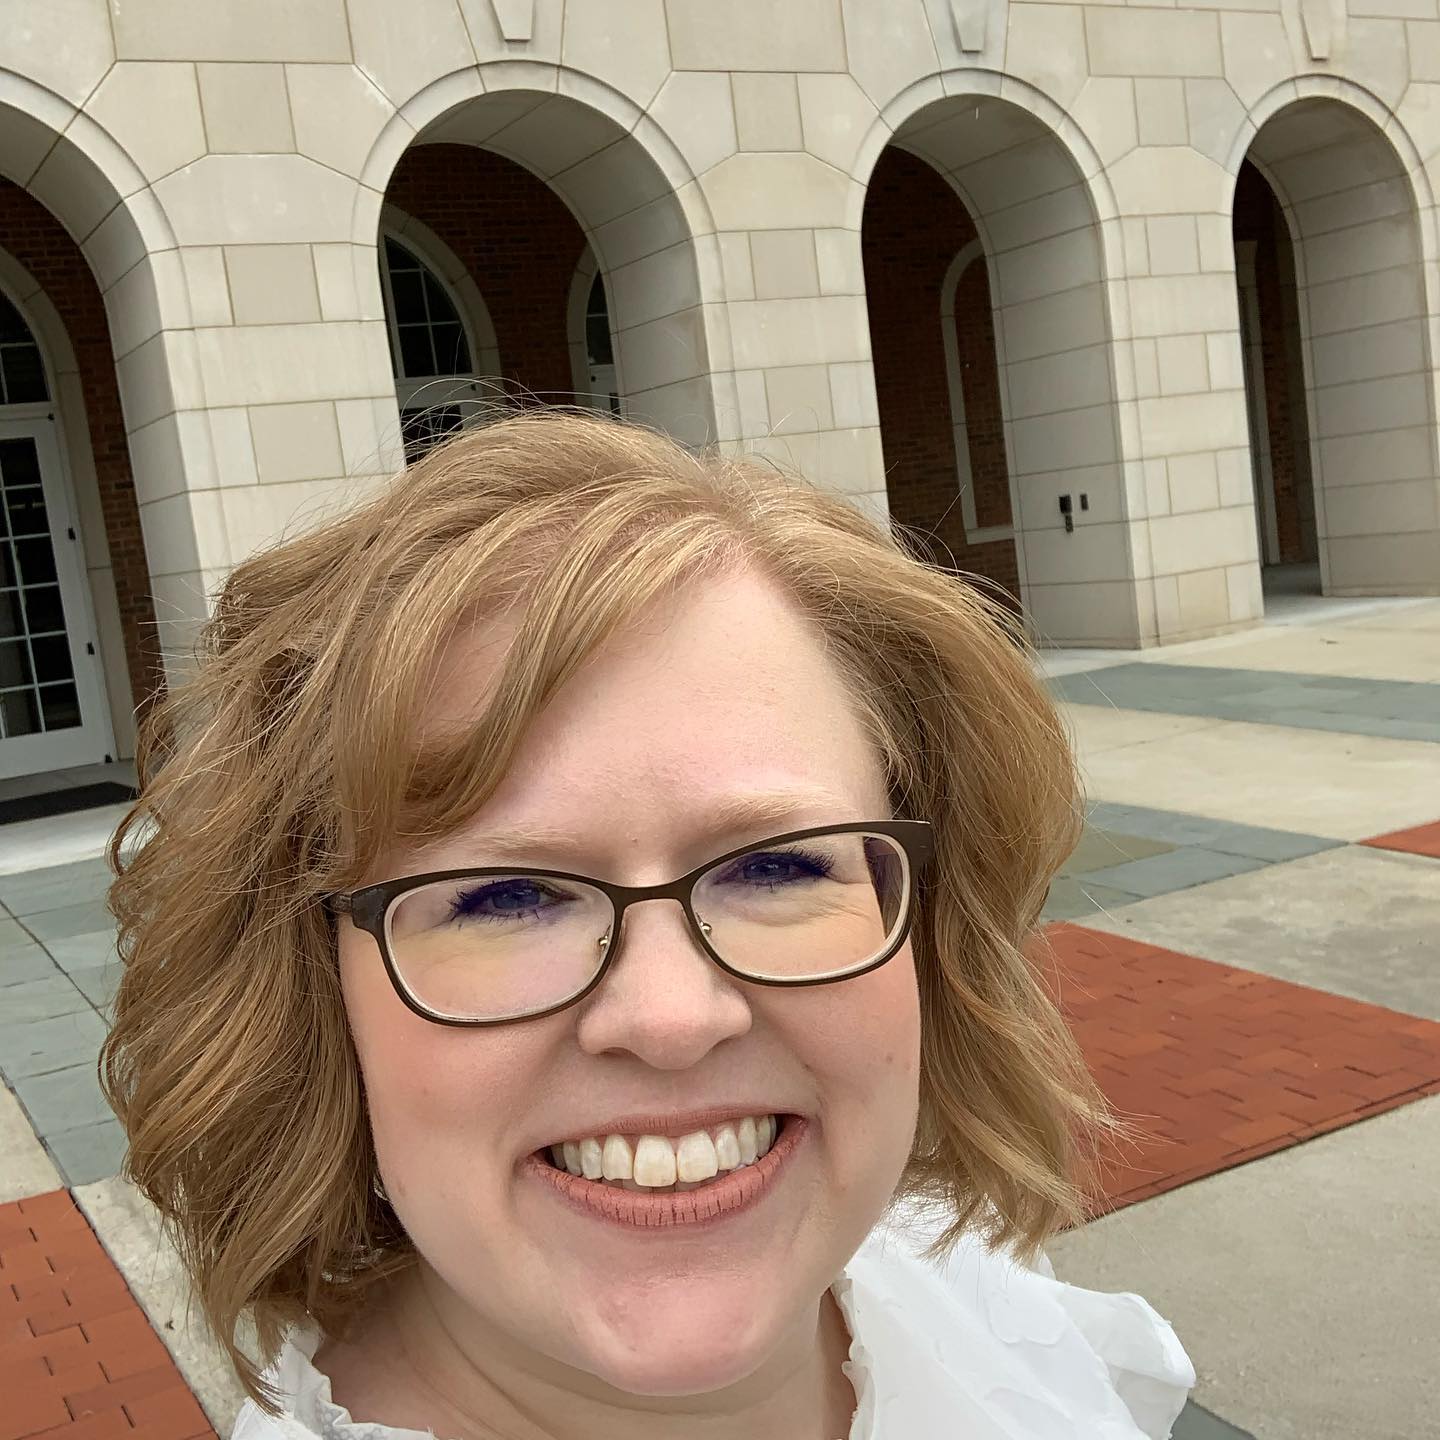 Jennifer Hutcherson chose WKU for some of the same reasons we hear over and over again from our students. She fell in love with the beauty of the campus the first time she visited on a field trip in high school, and WKU has remained her happy place ever since! Jennifer only applied to WKU for her undergrad and doctoral degrees. She says, “Arriving on campus for class for the first time in August 2021, I smiled so big! I was so happy to be at my home away from home!”  Jennifer is part of the Psychology Doctoral program, and lives in Campbellsville, KY. She works in Hardin County schools, where she is a school psychologist. She can see the benefits of the PsyD program already in her interviewing skills and her ability to recognize potential disorders.  Her dream is to open a psychological evaluation center where it is needed, in a rural area. She hopes to one day be able to train future WKU psychology students at her facility, and bring even more psychologists to this area.  The Hilltopper Spirit, to Jennifer, means togetherness and community. It’s part of being something bigger than yourself. It fills her heart with a sense of happiness and she knows she is where she belongs. We wish all the best to Jennifer and we hope to see that training center come to fruition one day!